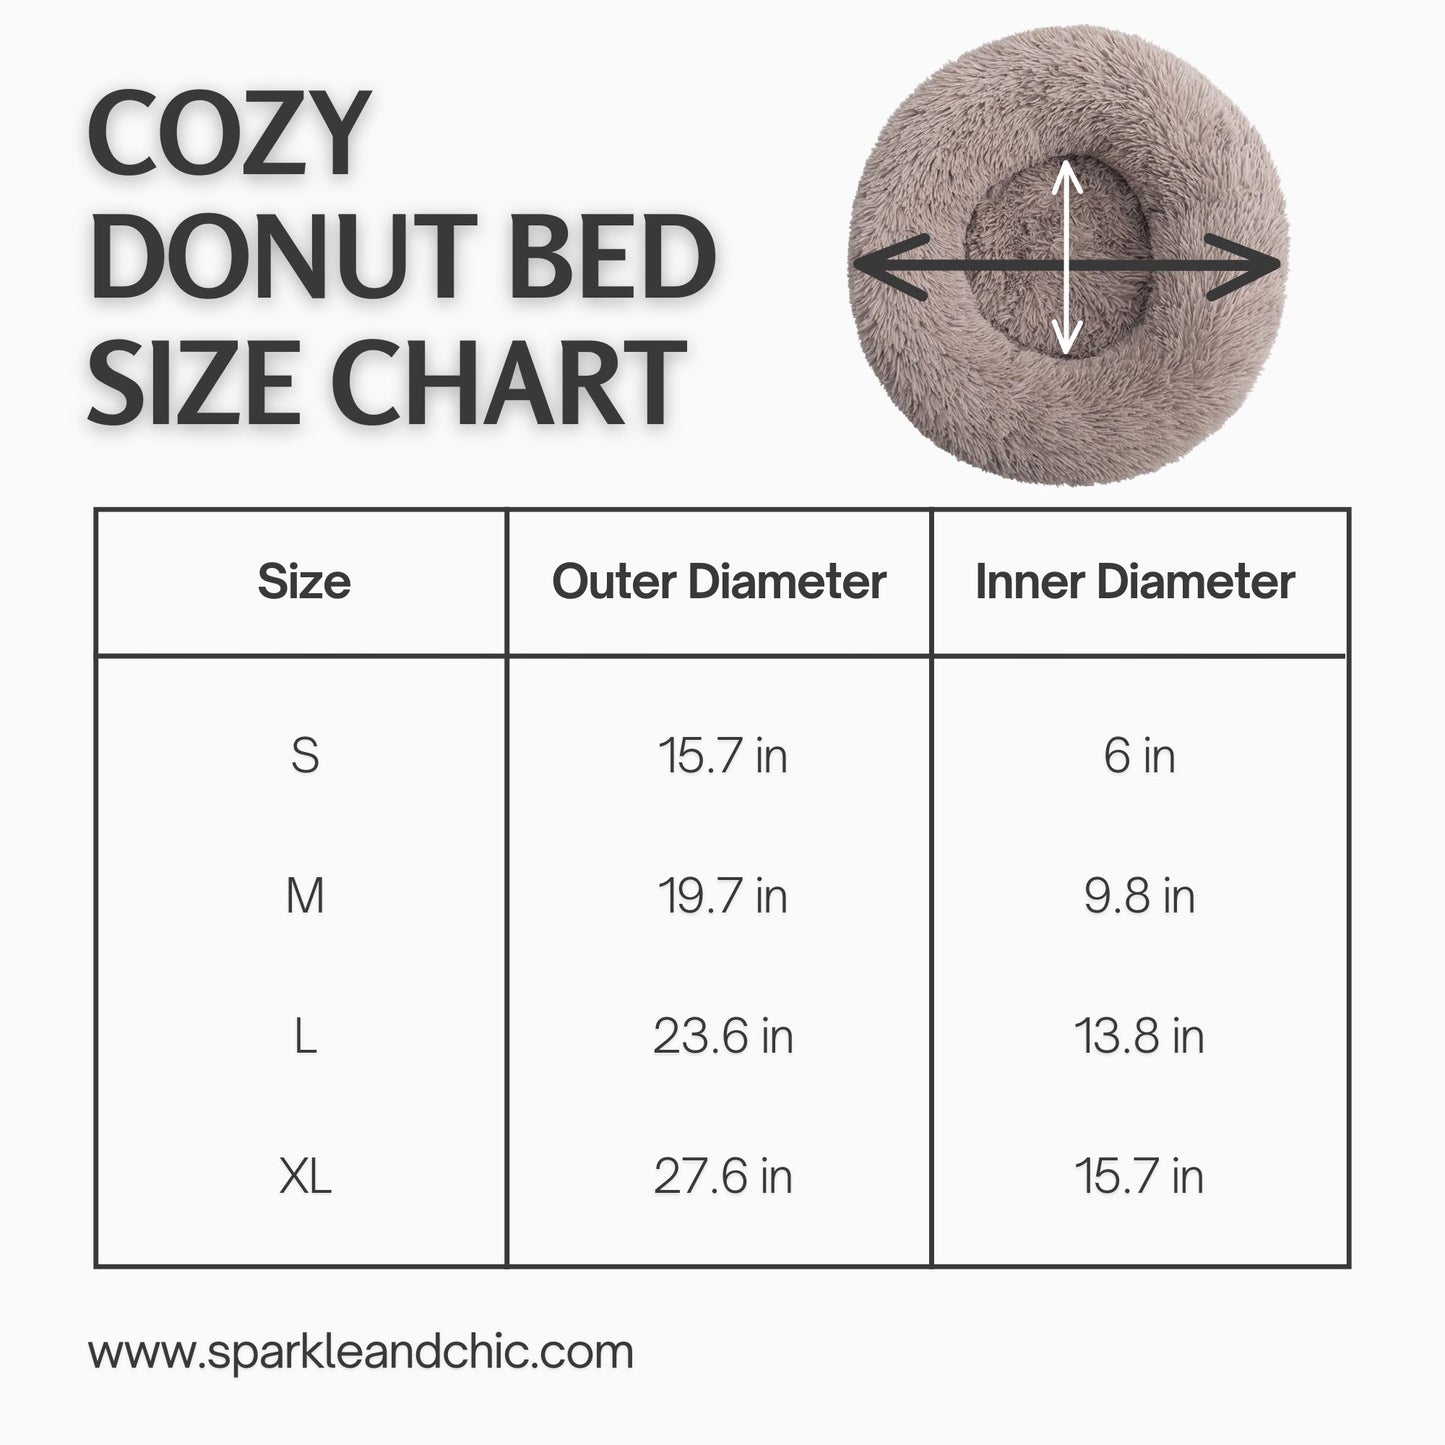 Cozy Donut Bed